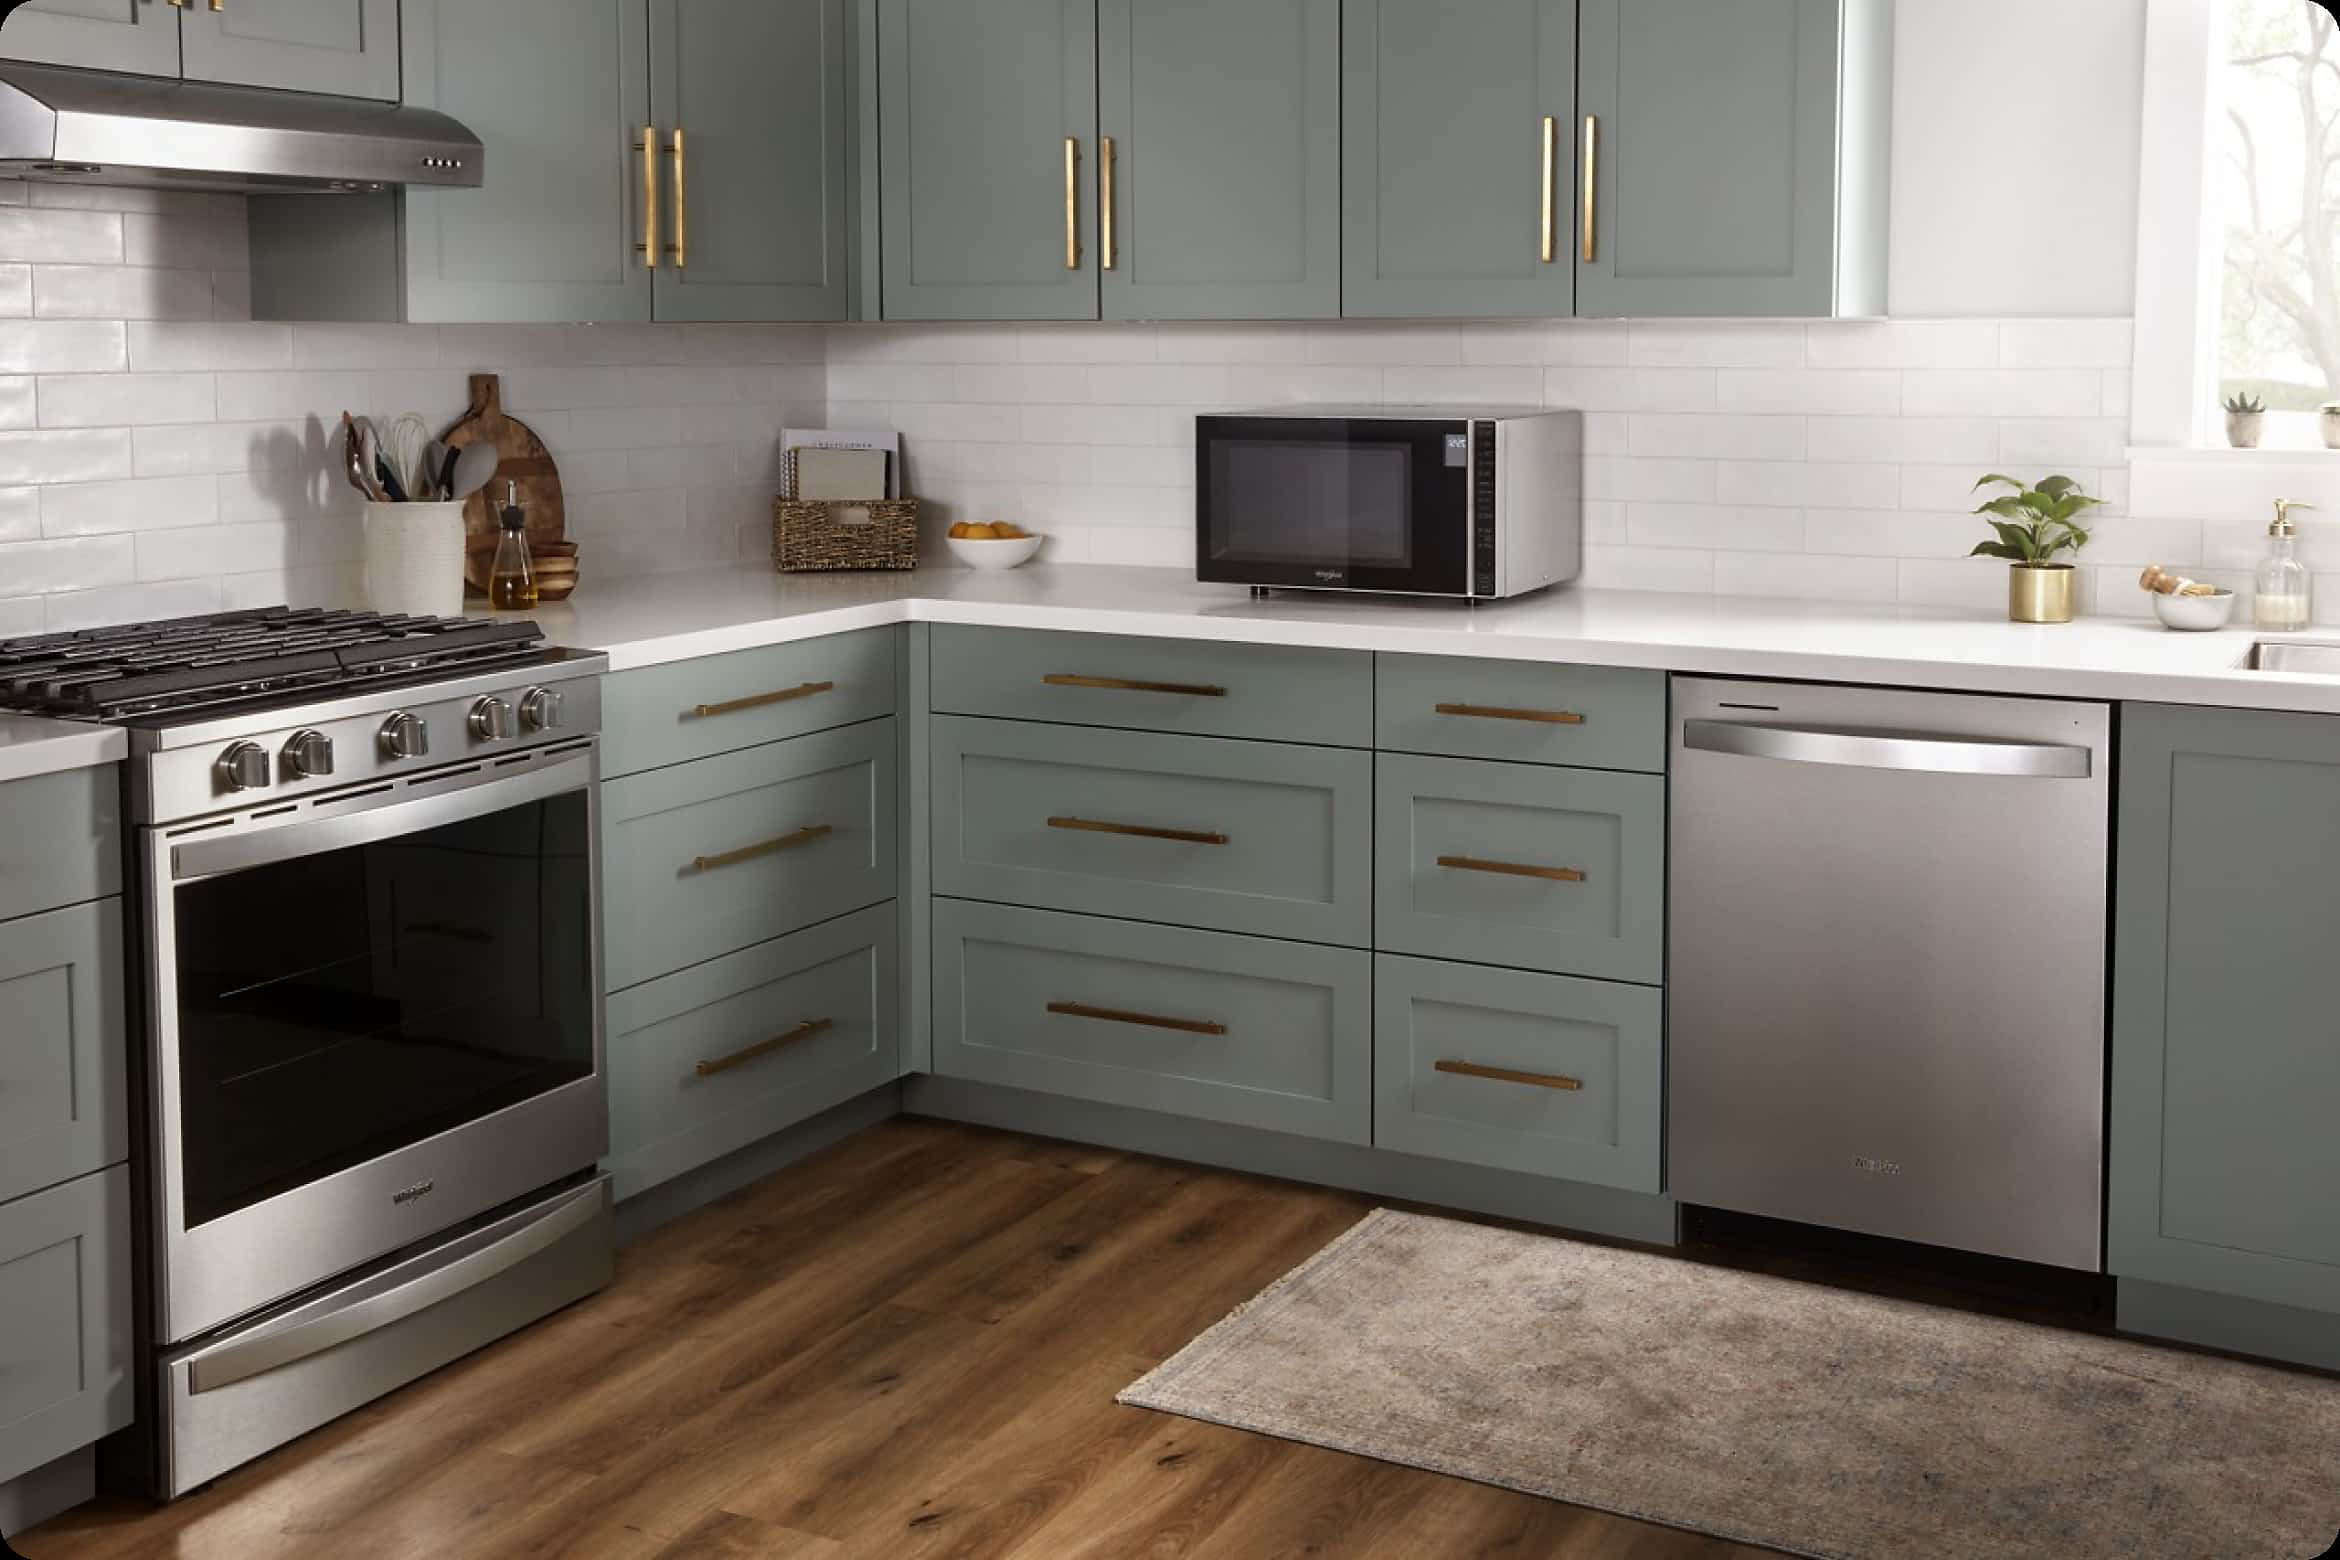 A clean, modern kitchen full of Whirlpool® Appliances